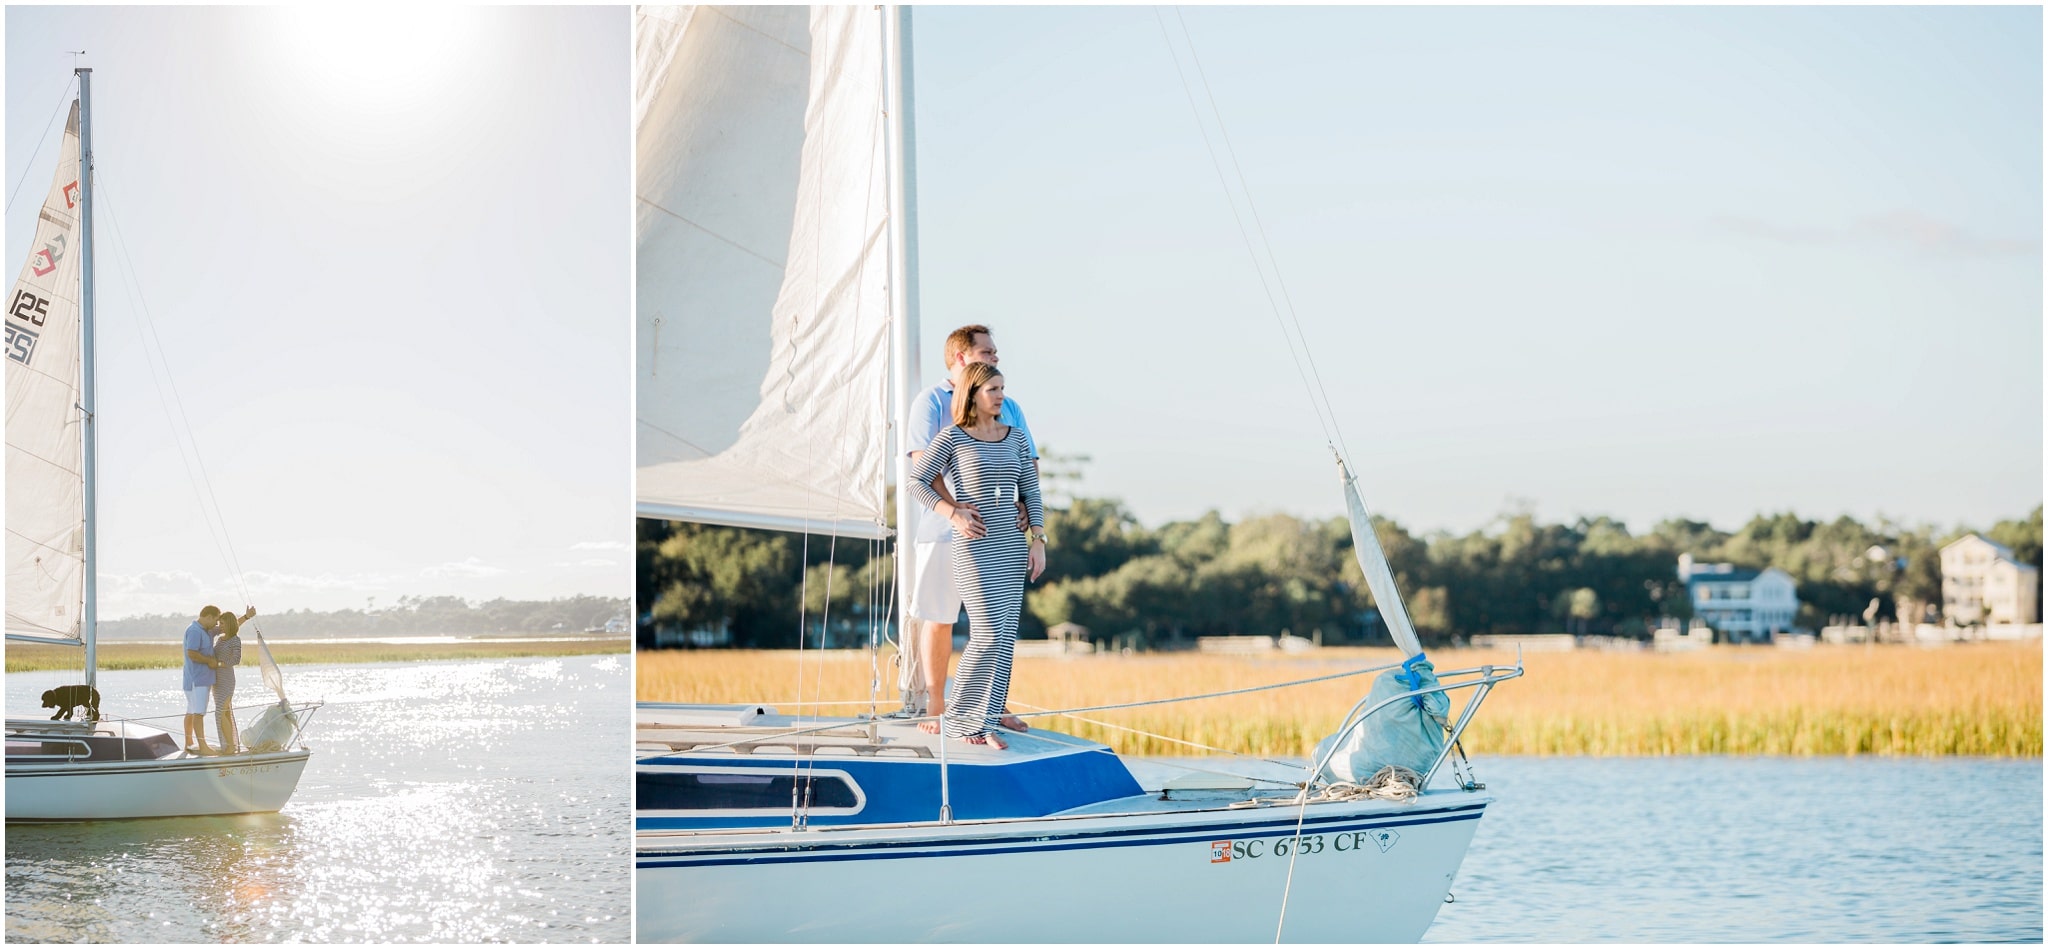 Murrells inlet Wedding, Dana and Bradley, Sailing and embracing on the front of the boat, Myrtle Beach Engagement Photography Session 9, Murrells Inlet, South Carolina, www.onelifephoto.net